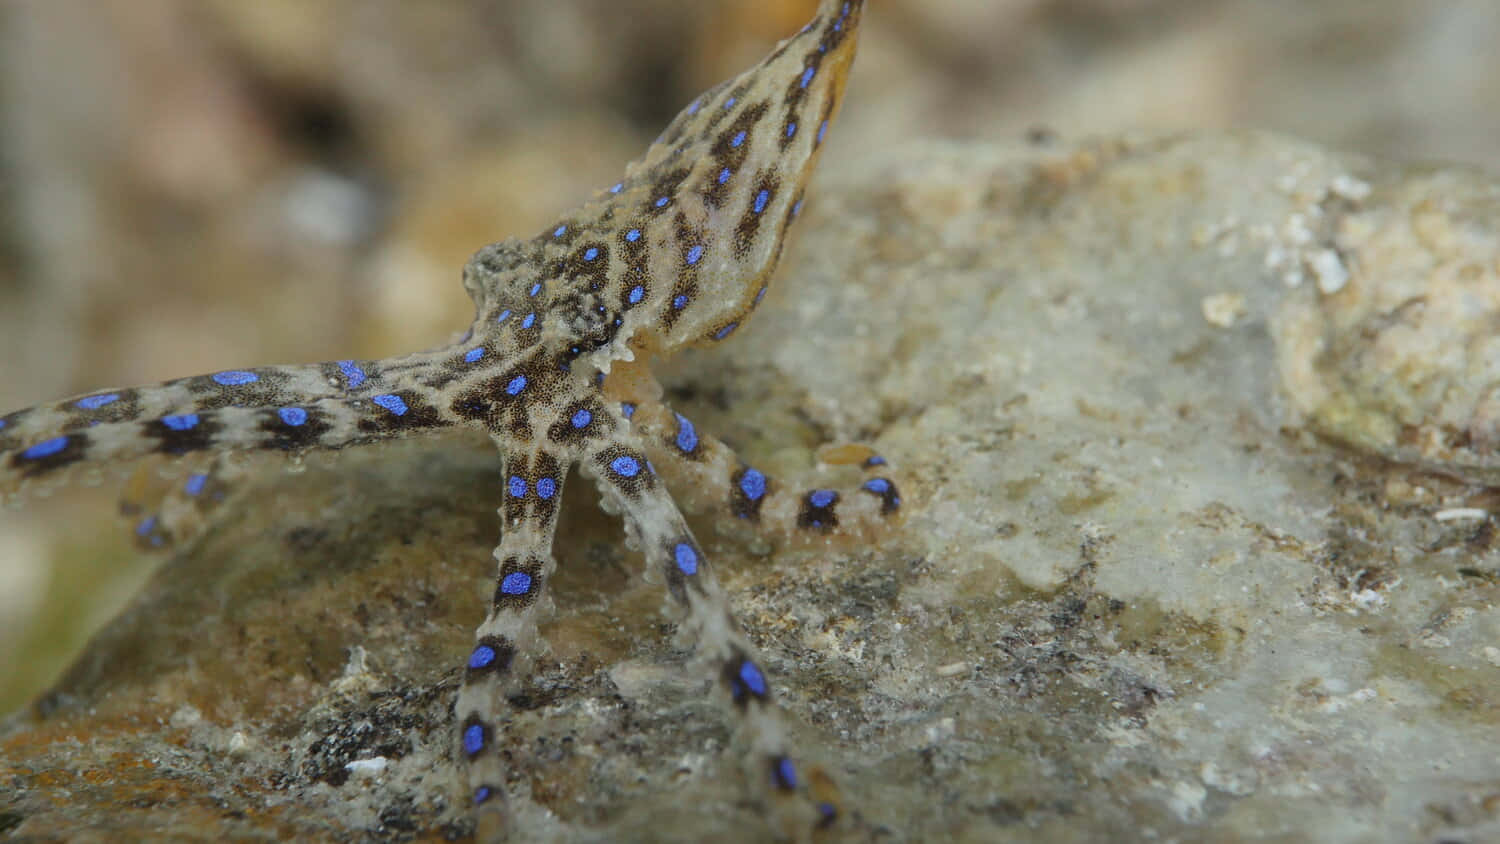 Blue Ringed Octopus Camouflage Wallpaper